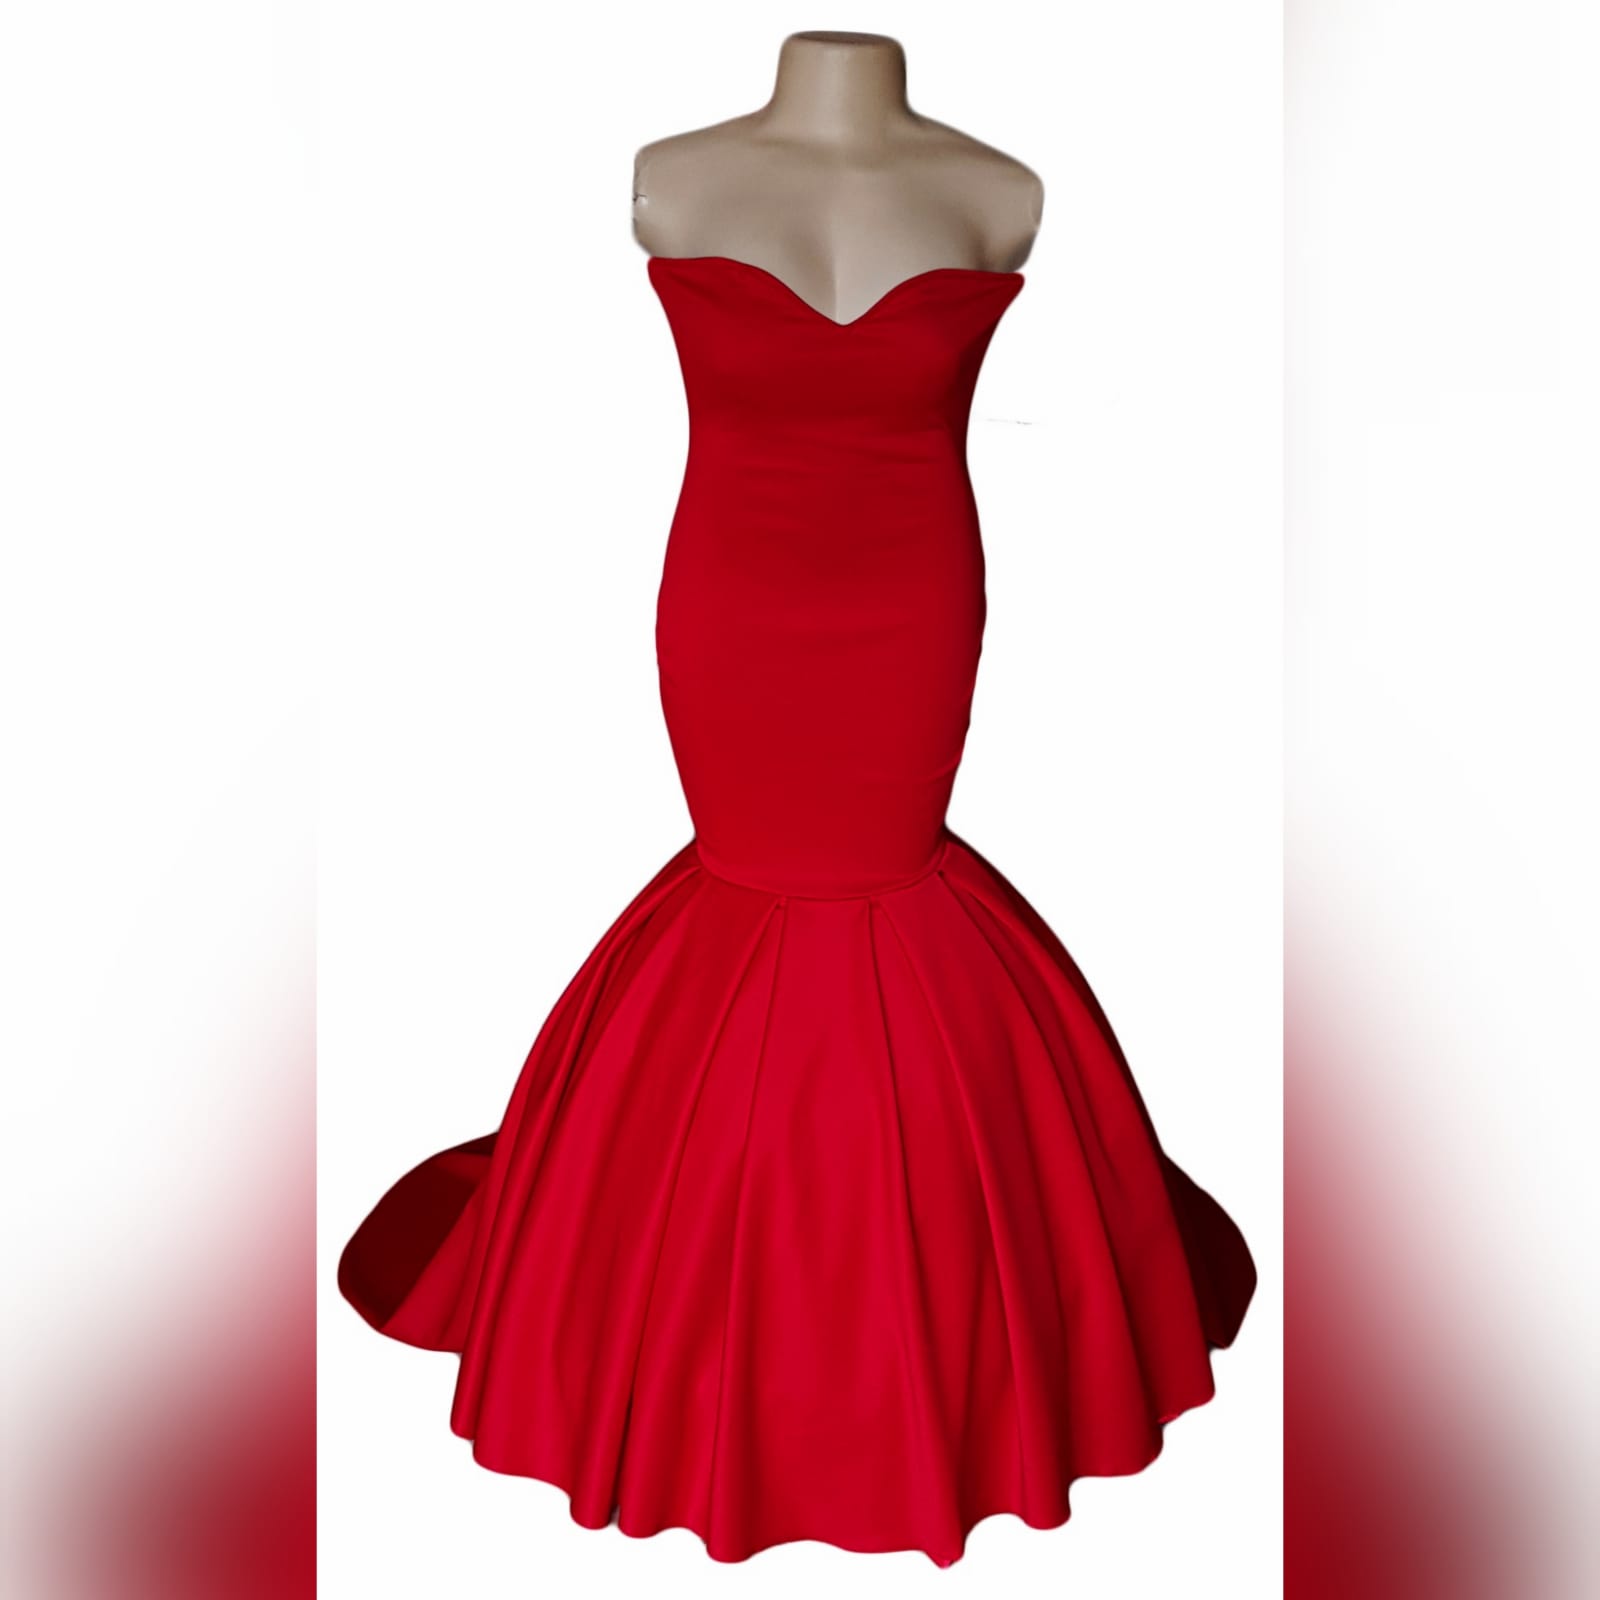 Bright red boobtube mermaid prom dress 2 bright red boobtube mermaid prom dress with a sweetheart neckline, bottom with volume and a train.